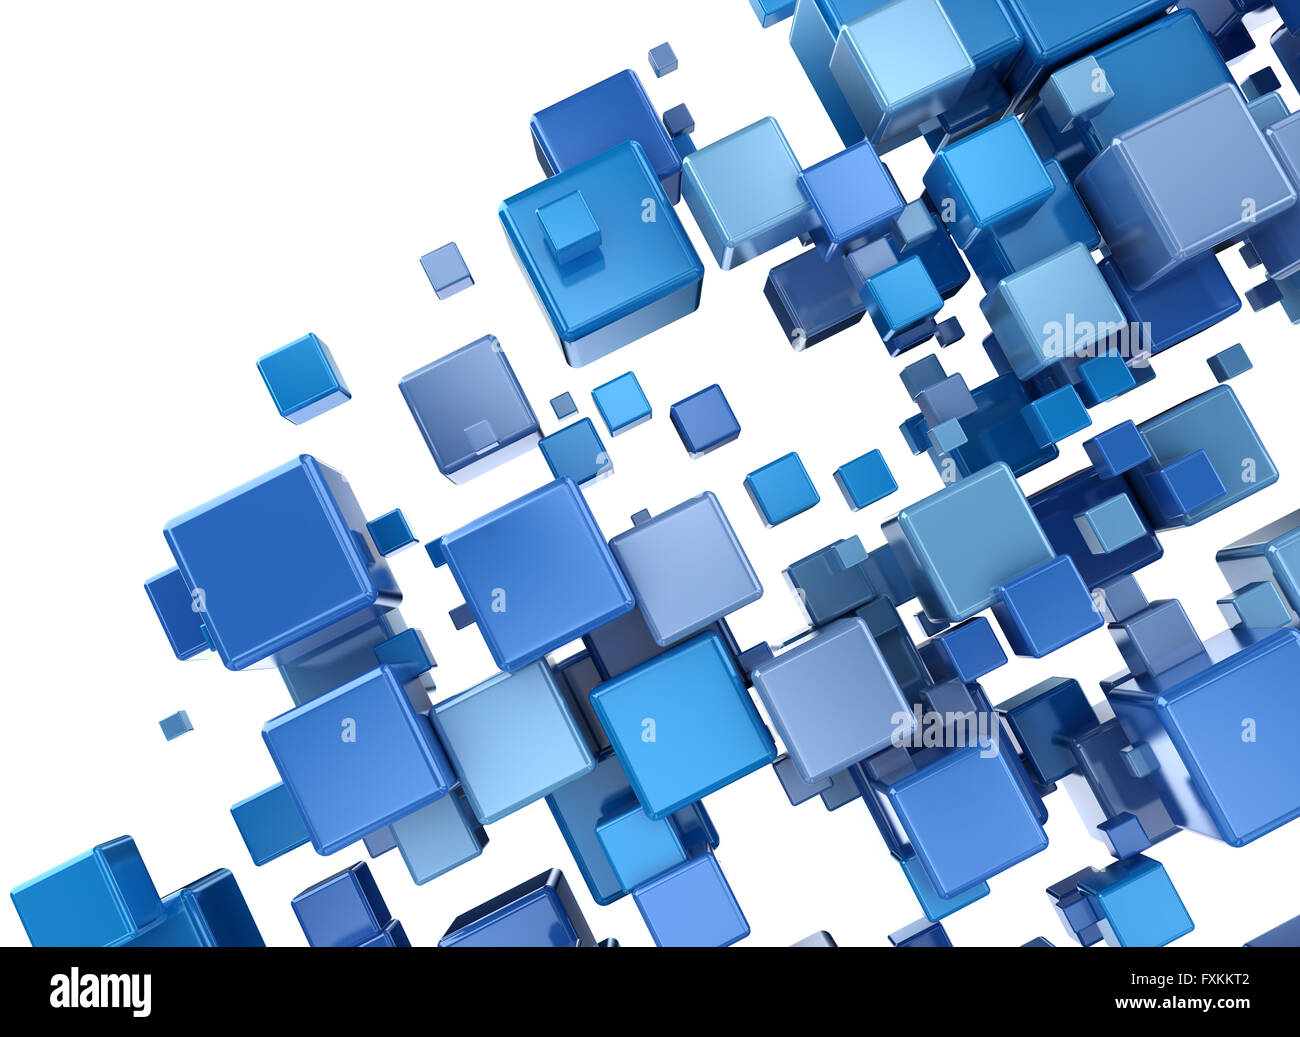 Abstract digital blue 3d cubes isolated on white background Stock Photo